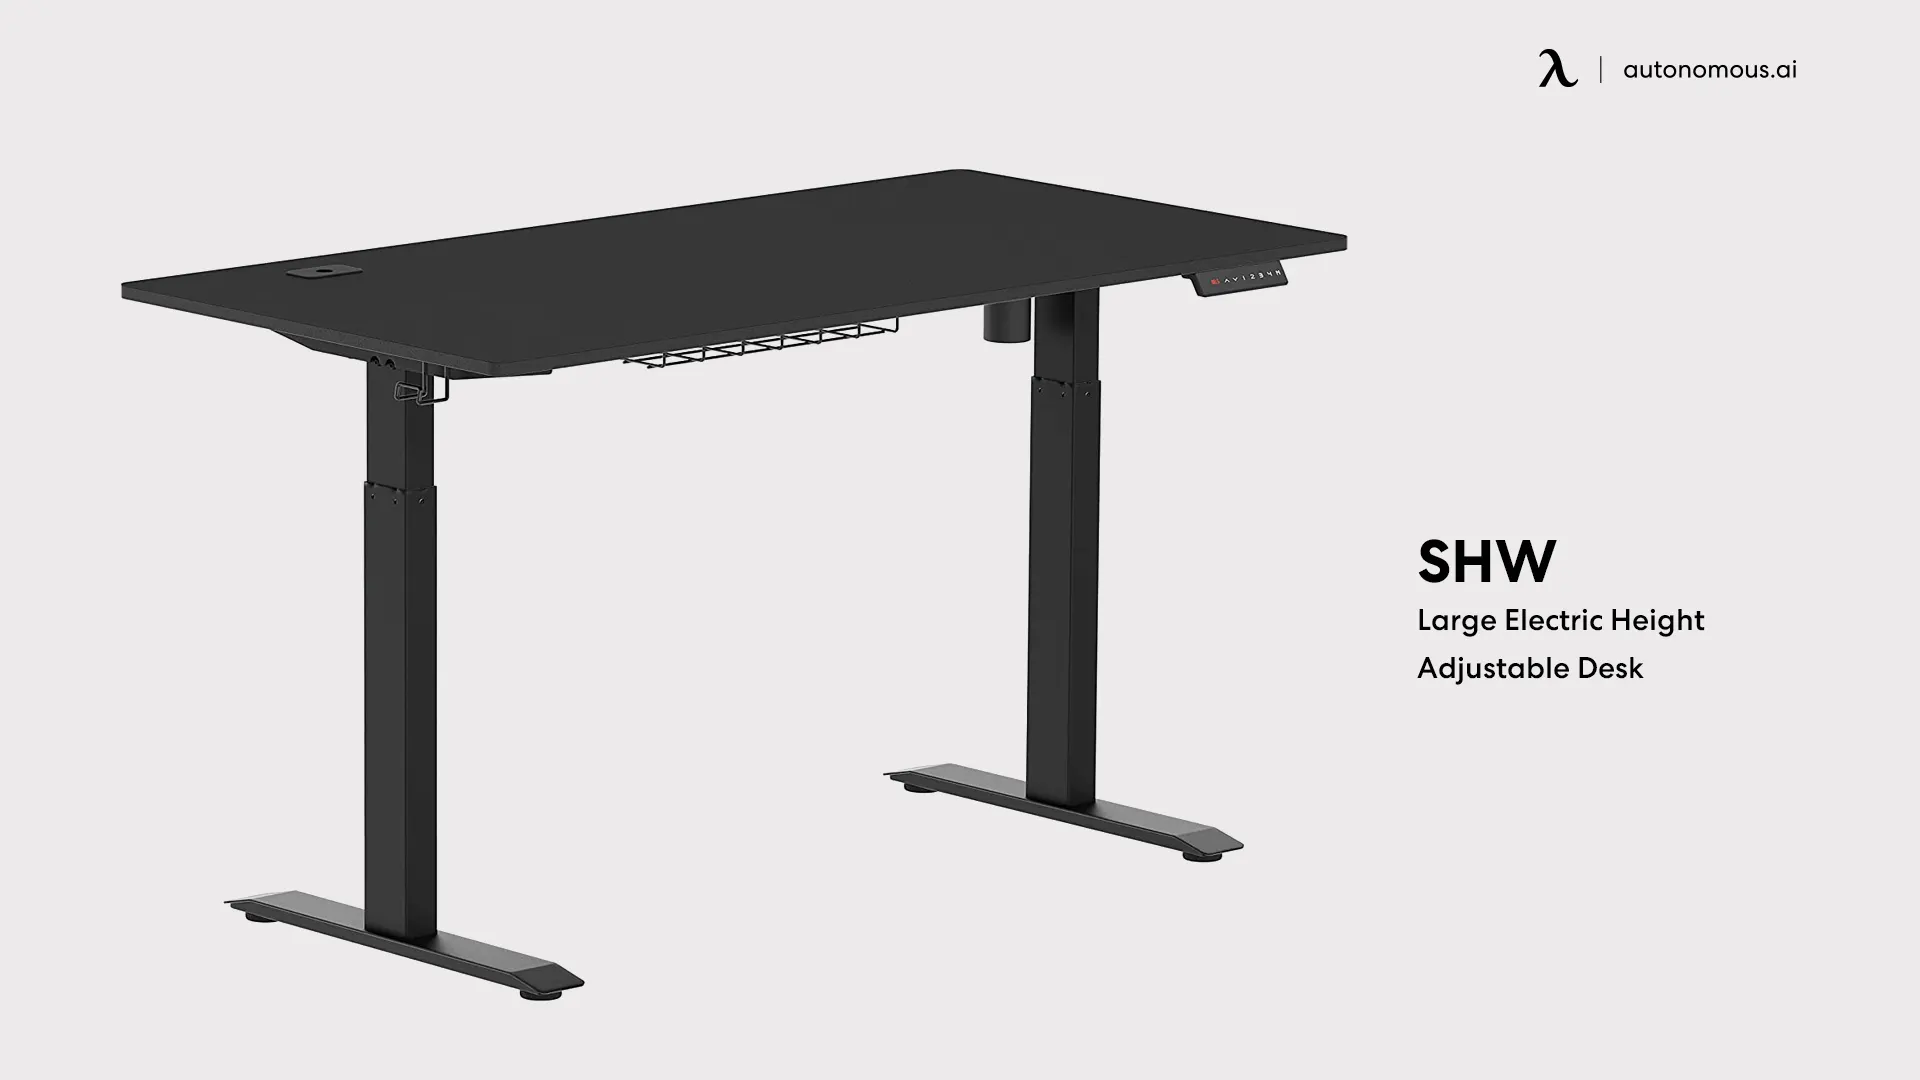 Large Electric Height Adjustable Desk from SHW